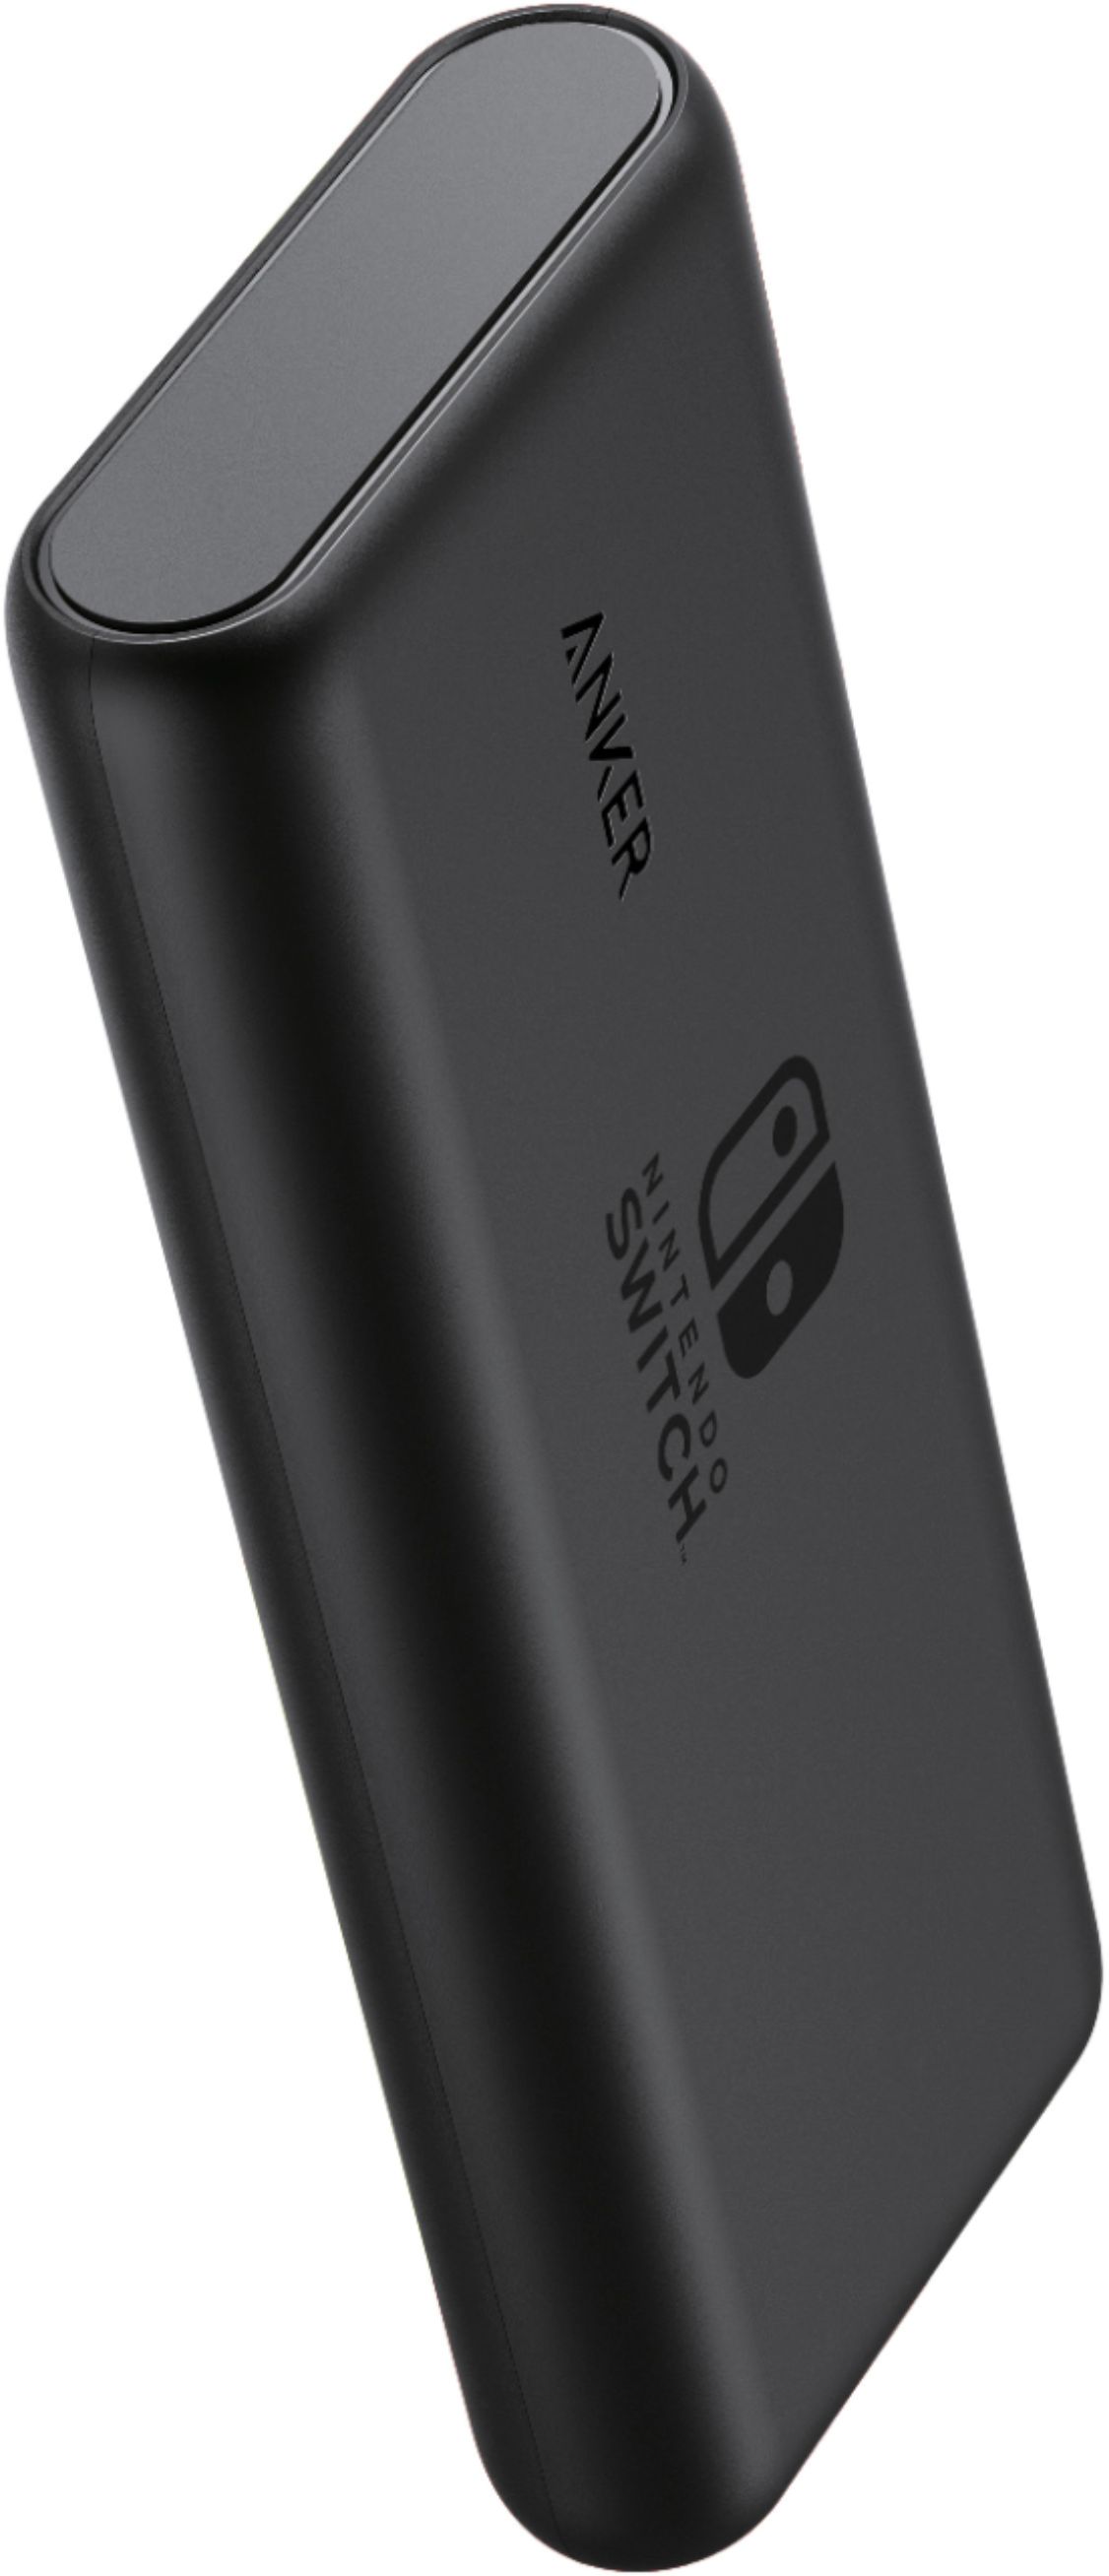 Best Buy: Anker PowerCore mAh Portable Charger for the Nintendo Switch Most USB-Enabled Devices Black A1275S11